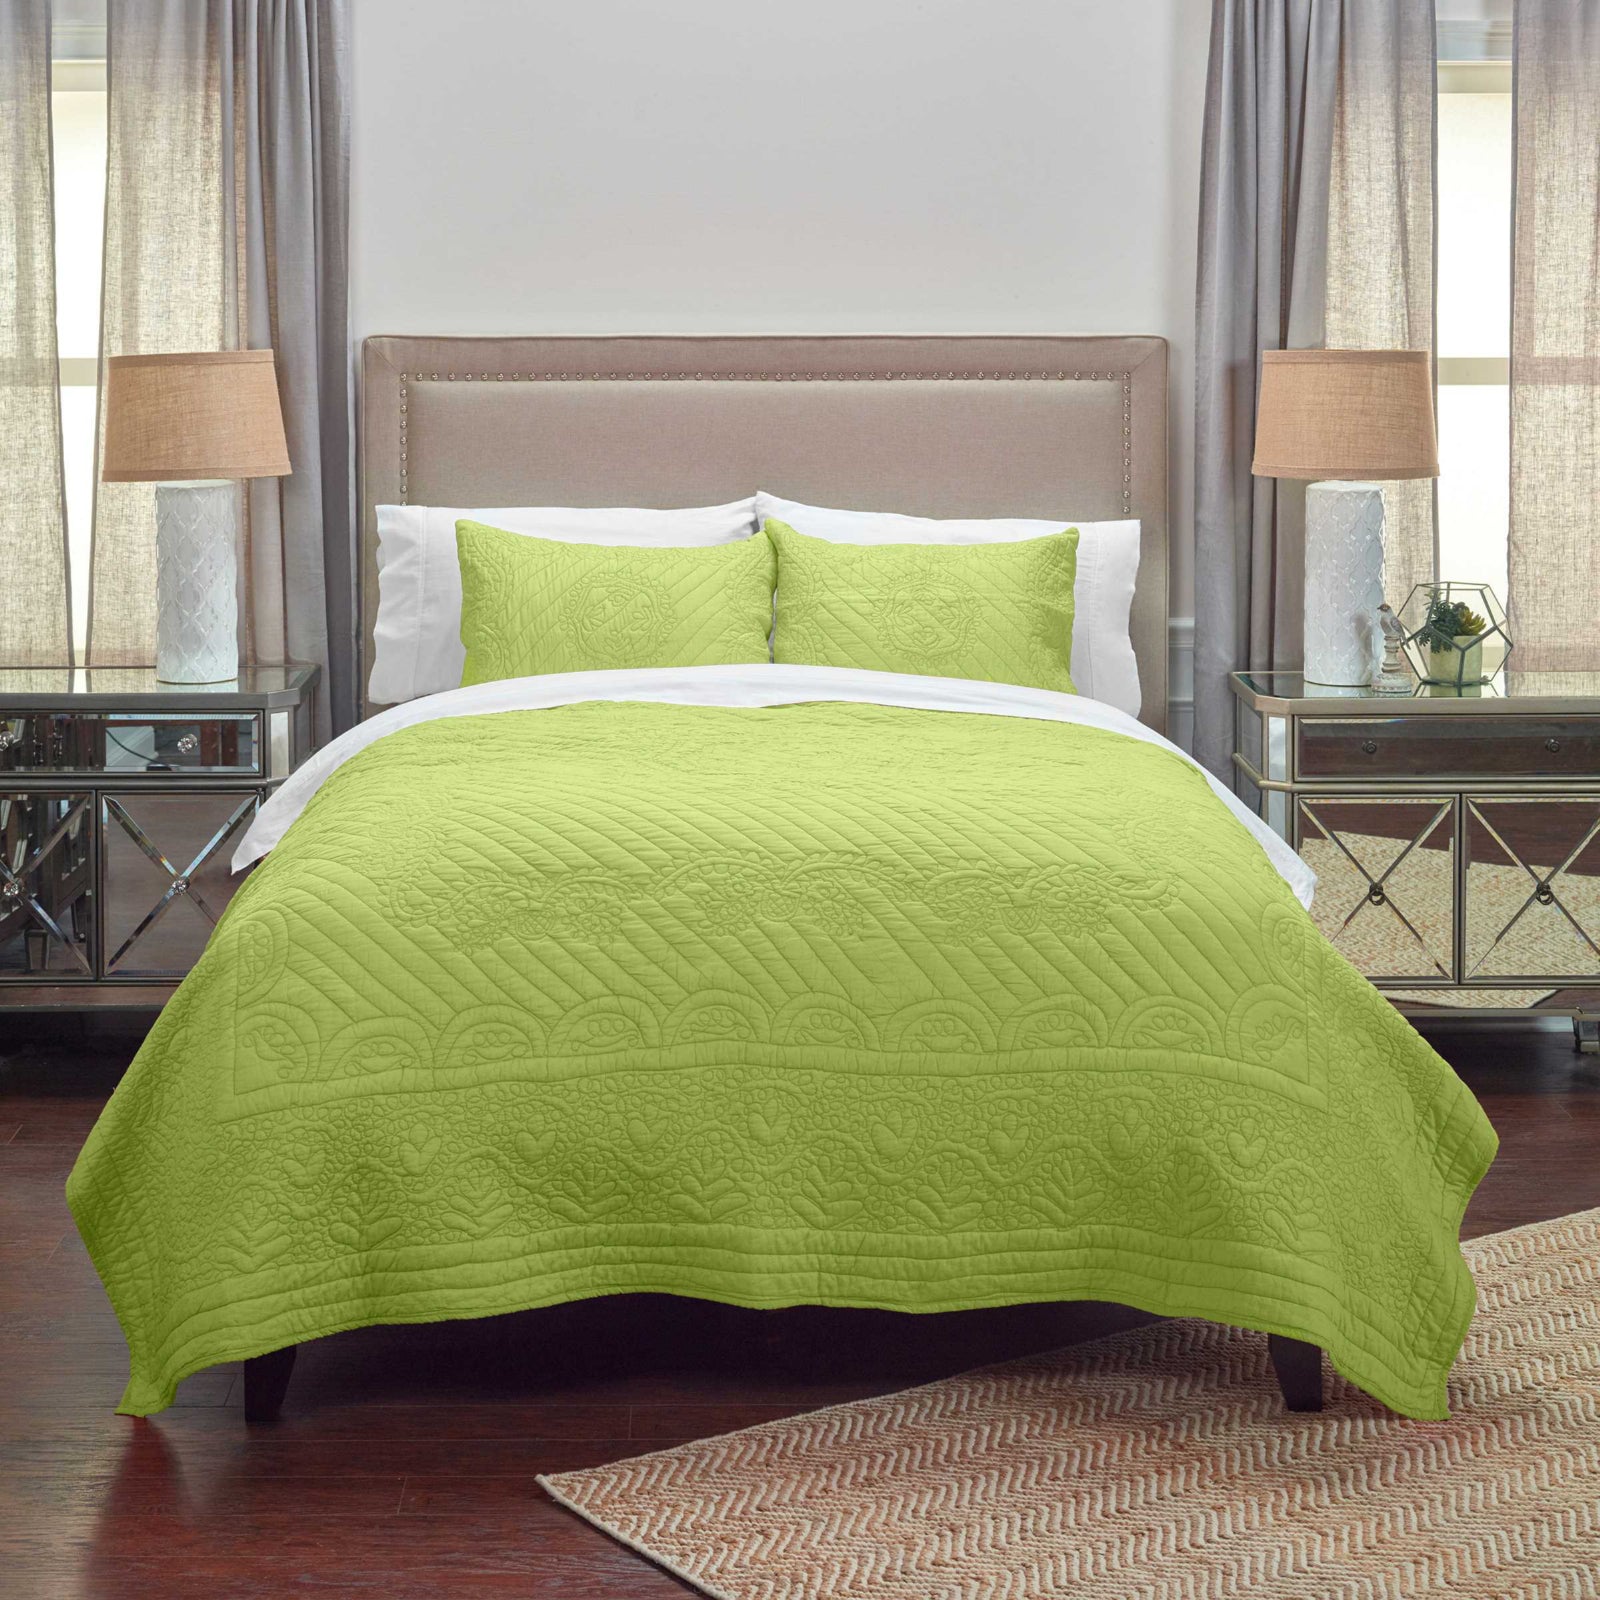 Rizzy BT1788 Moroccan Fling Lime Green Bedding main image